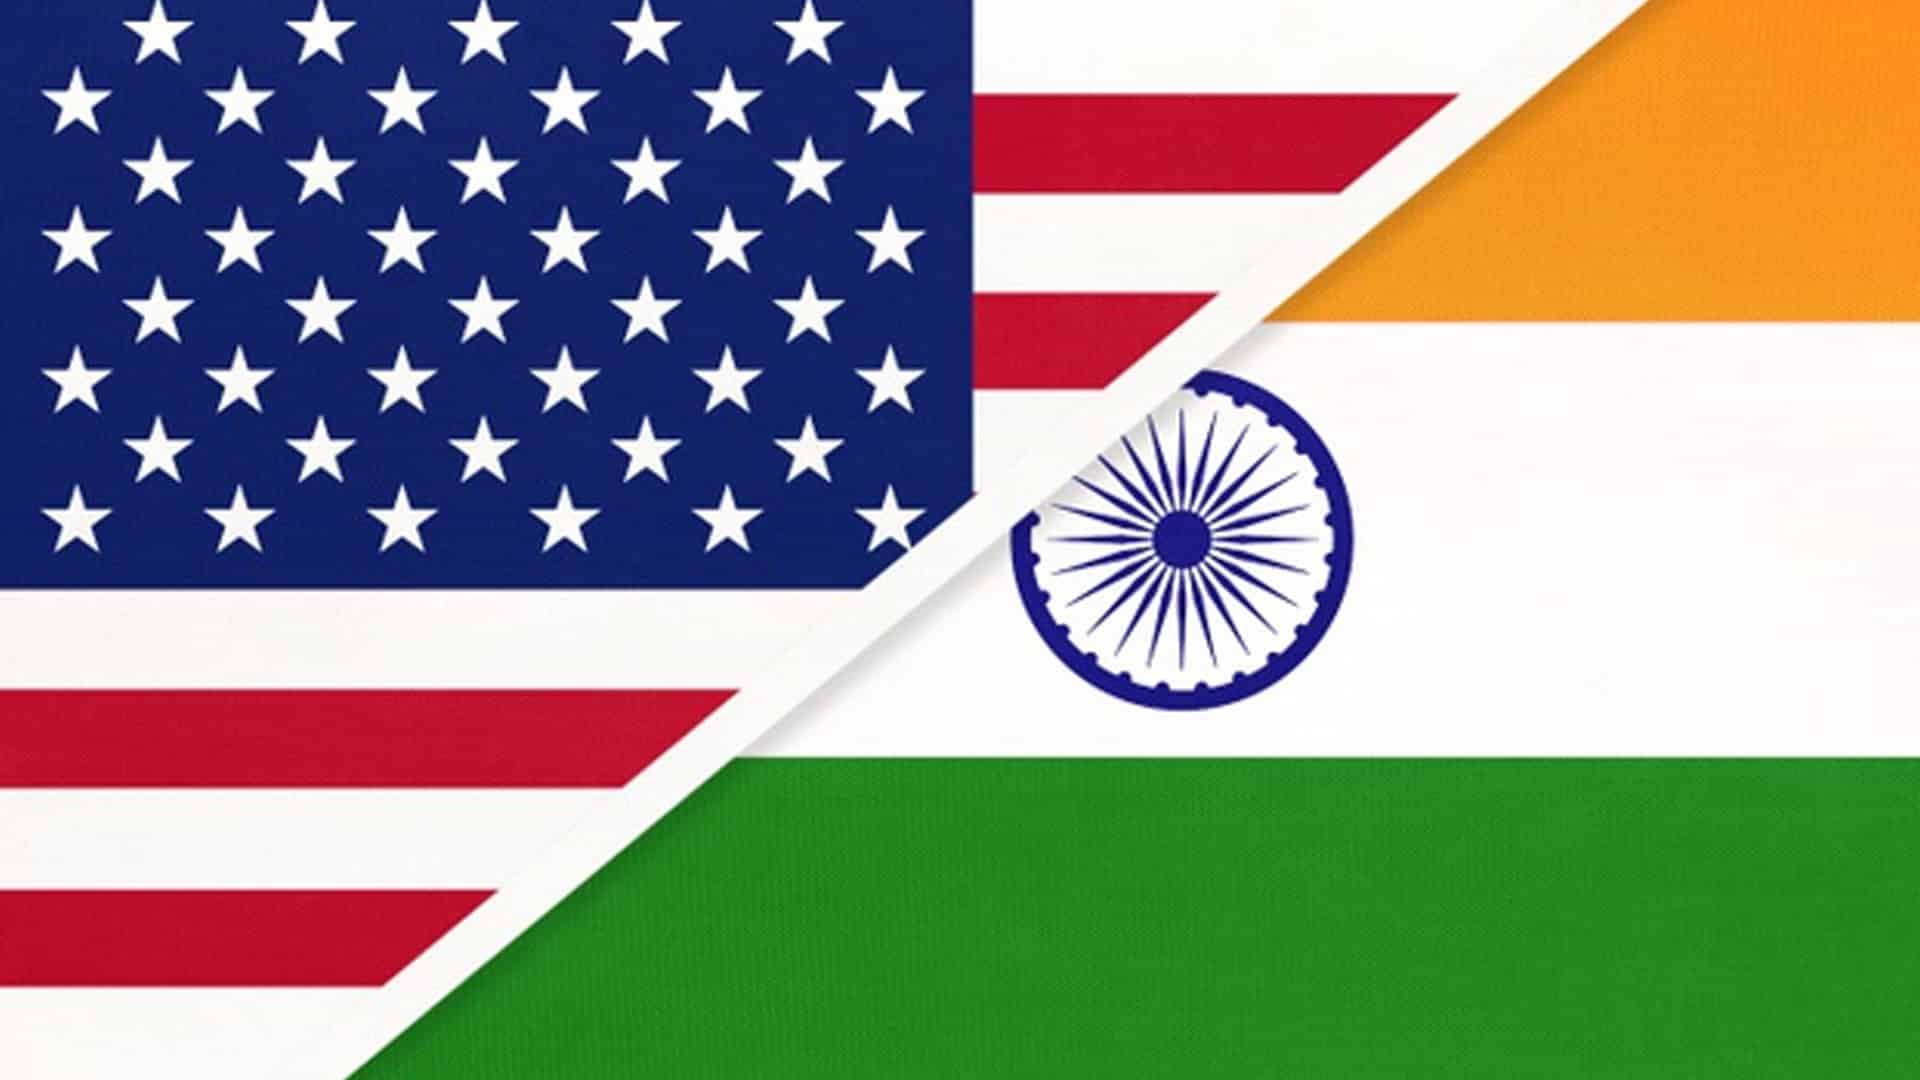 India Subcontracting Expo 2021 to highlight trade opportunities in India for US businesses